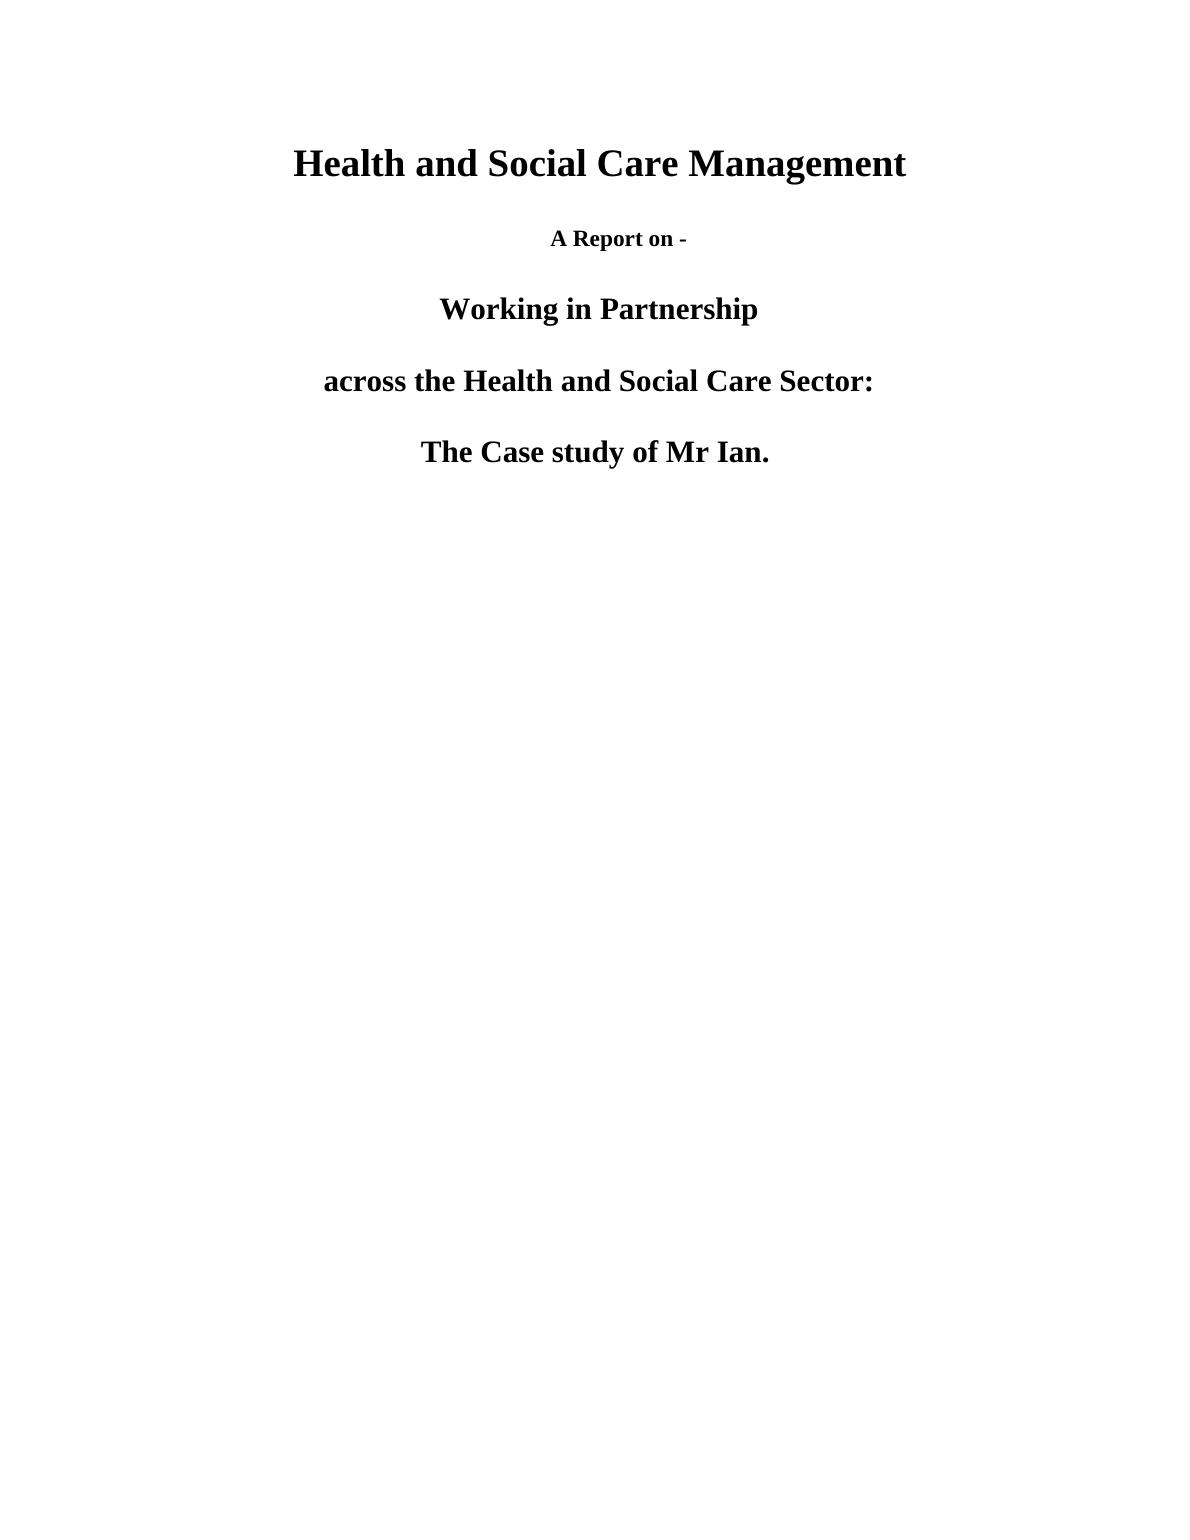 Health and Social Care Management : Assignment_1